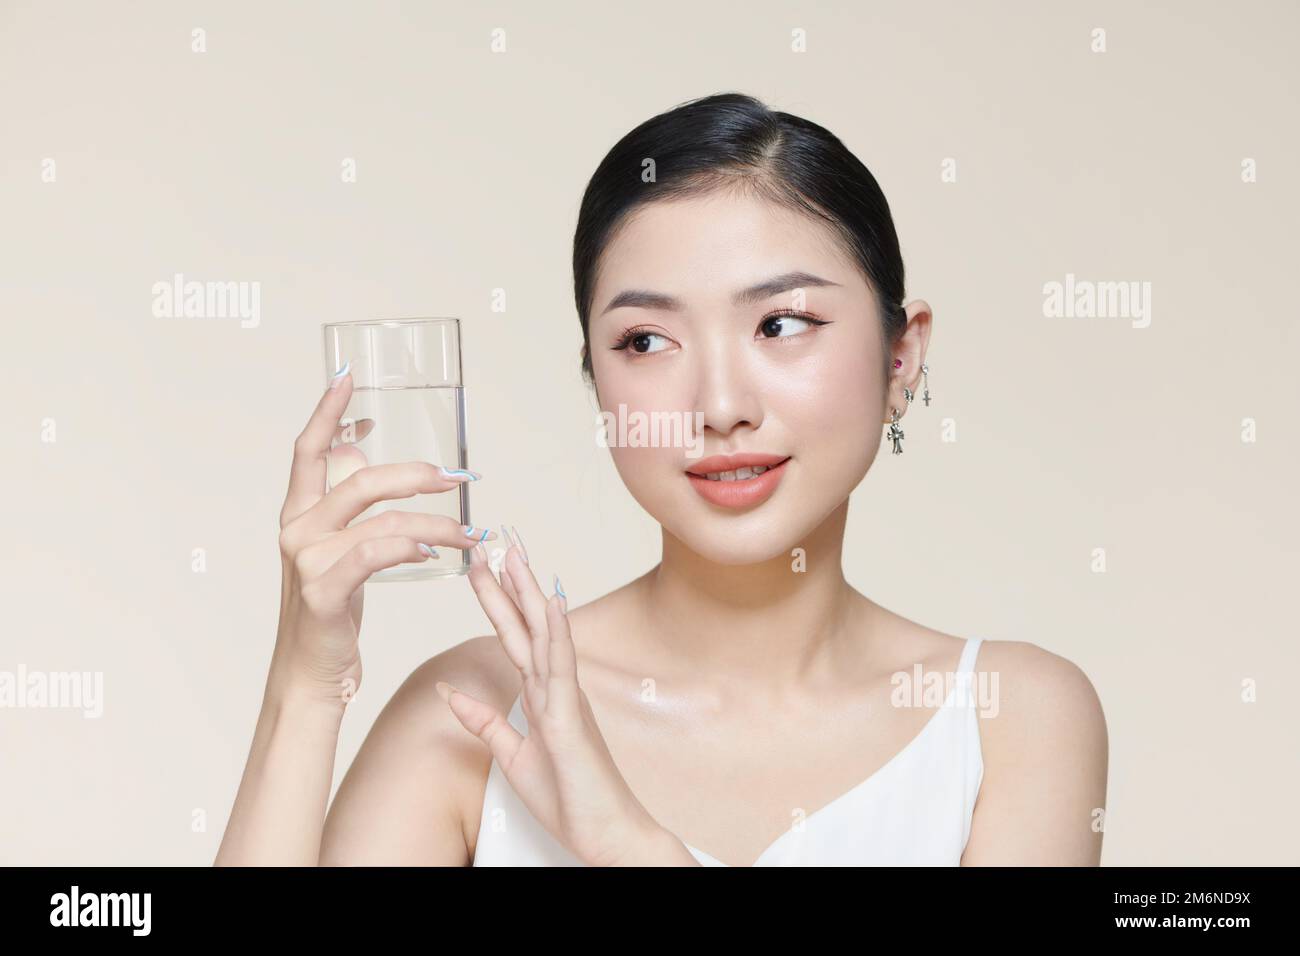 pretty young woman drinking water from glass Stock Photo